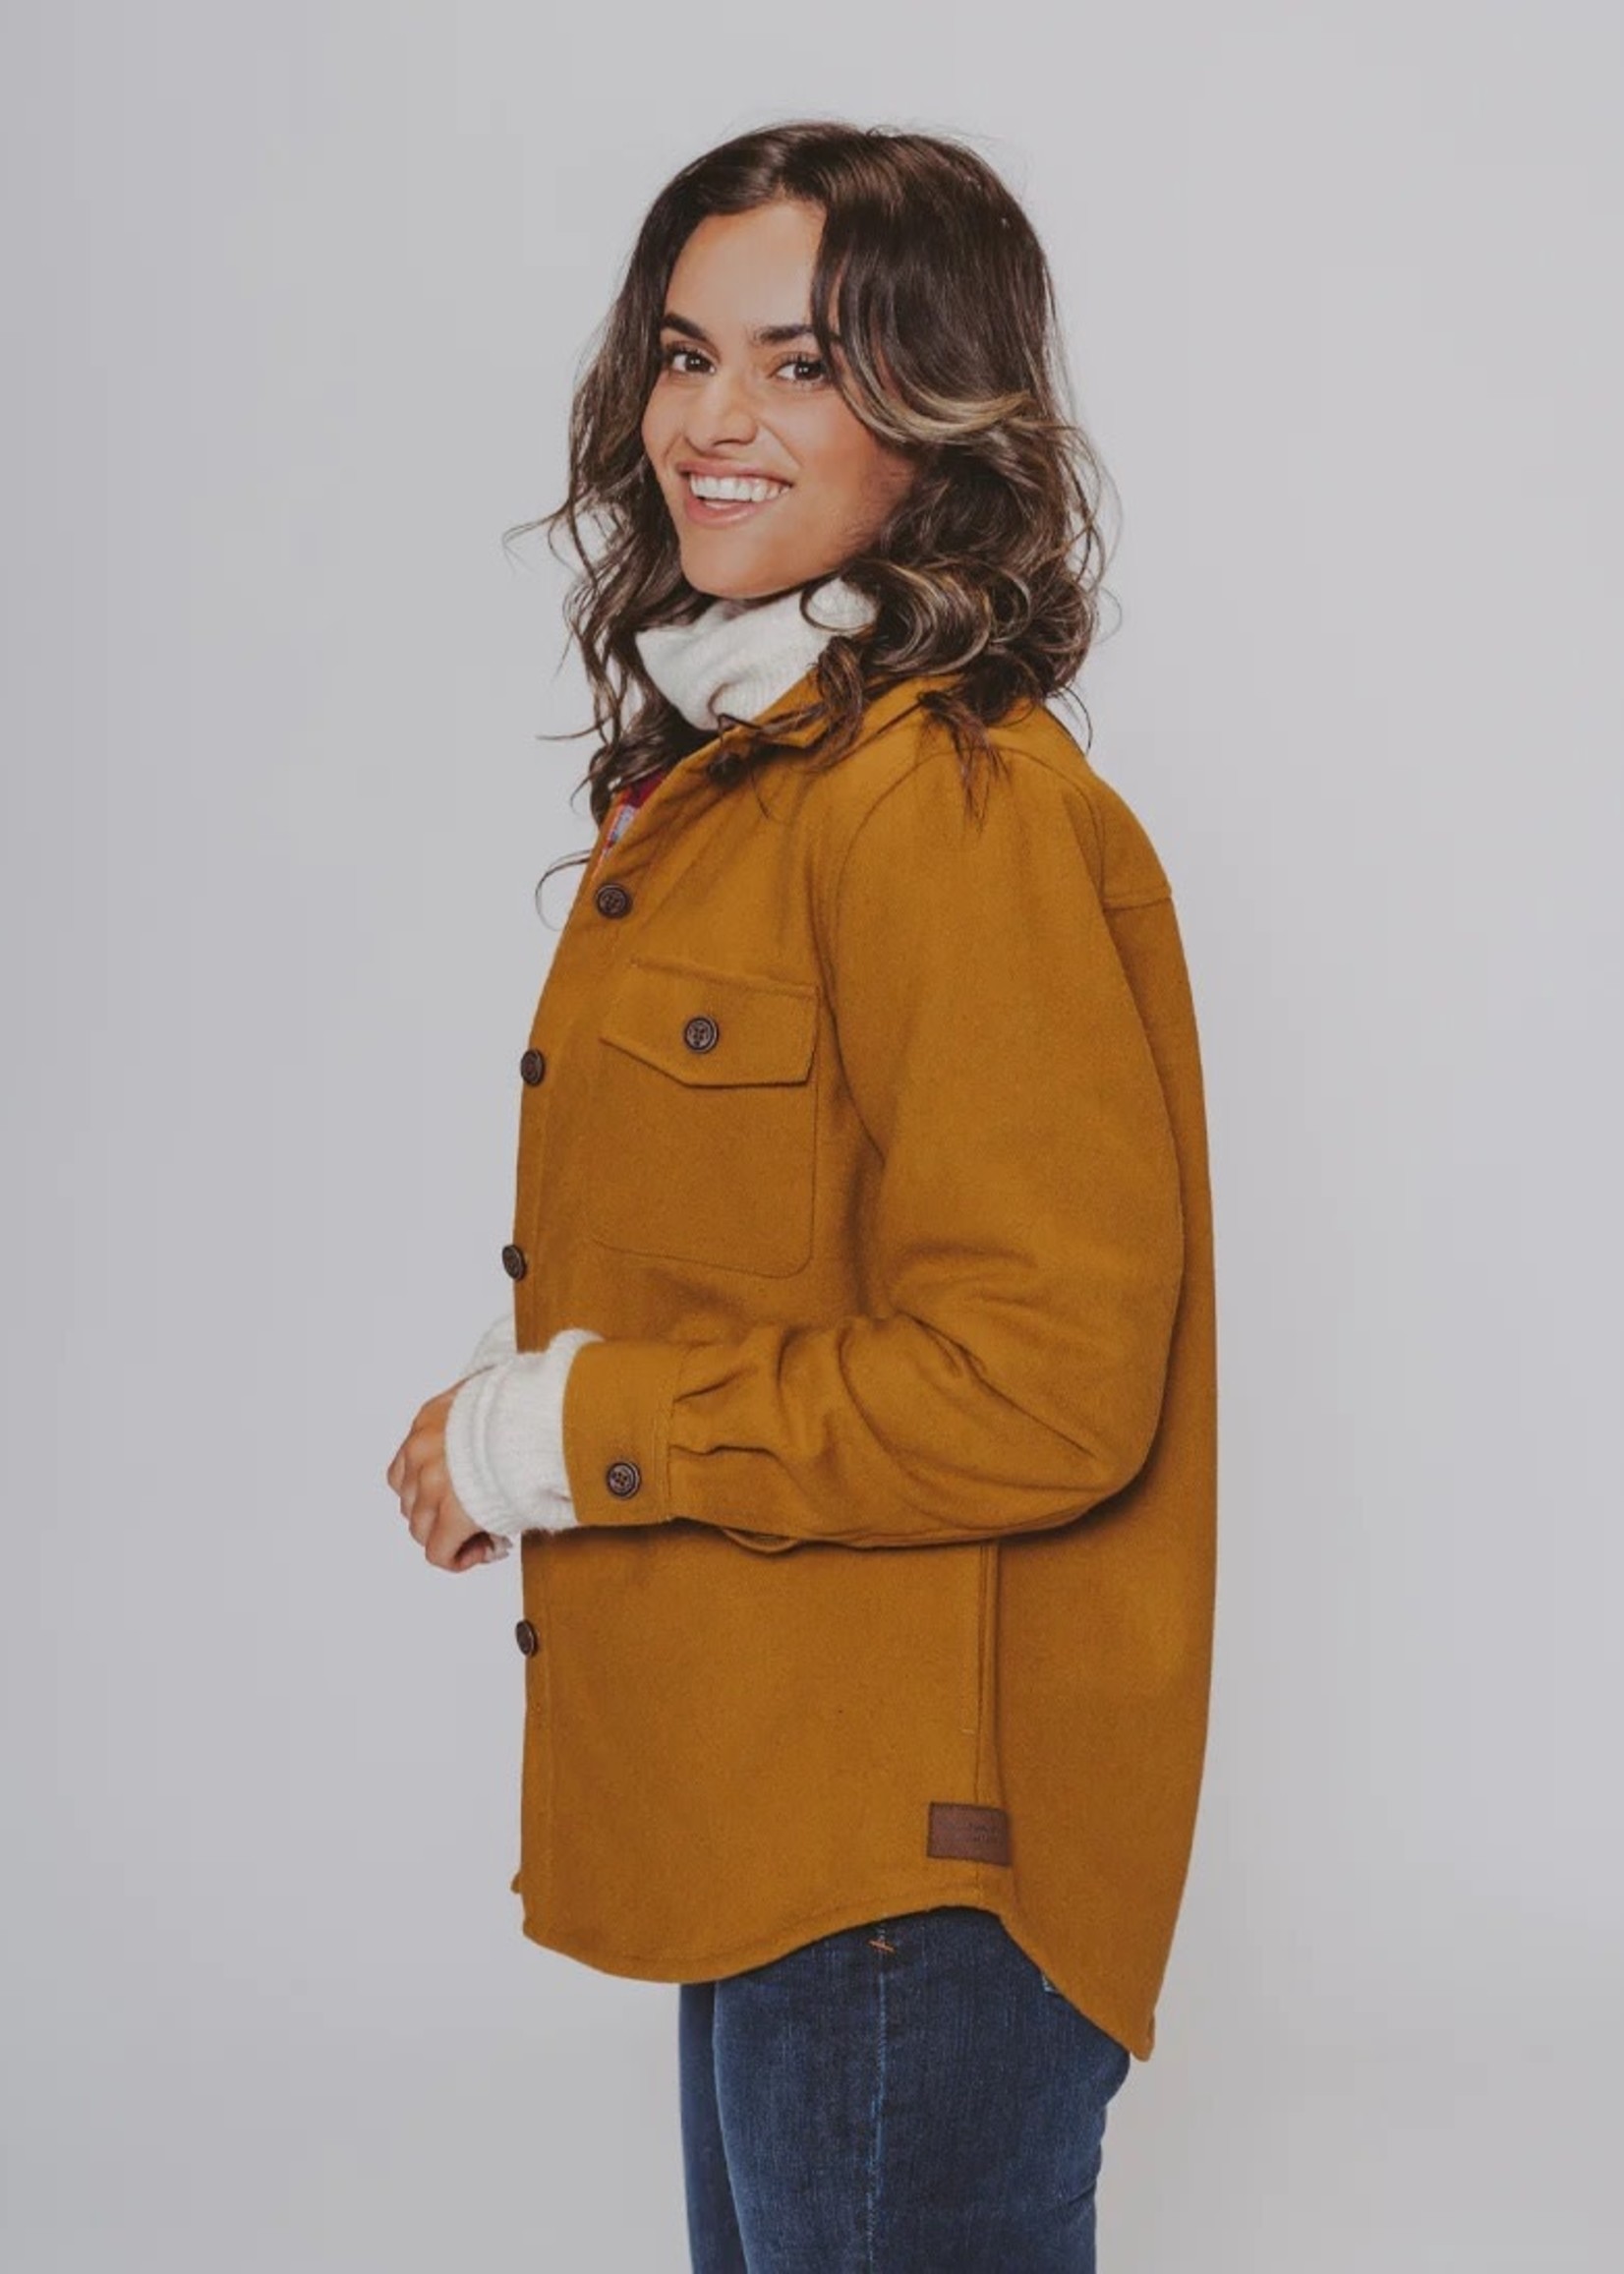 The Normal Brand Women's Brightside Flannel-Lined Jacket Gold